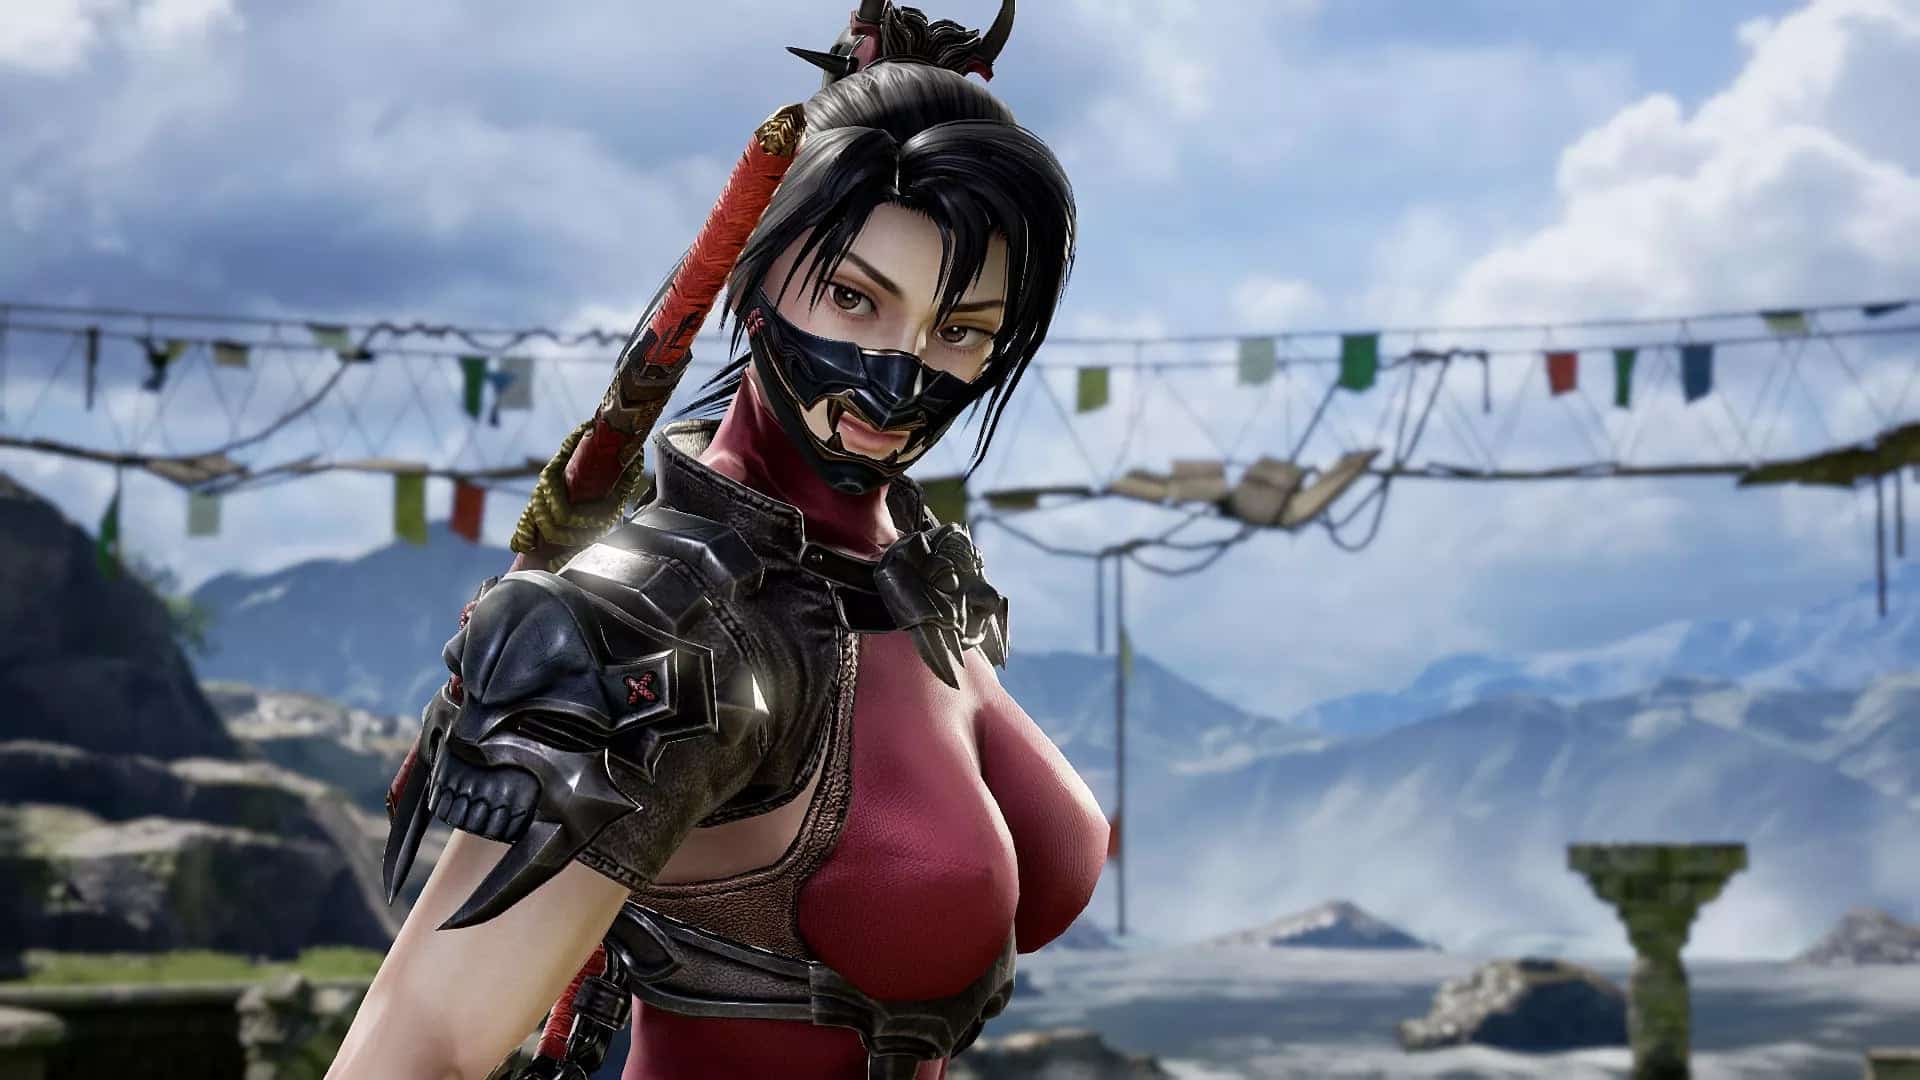 Soulcalibur 6 Update Version 1.42 New Full Patch Notes PC PS4 Xbox One Full Details Here